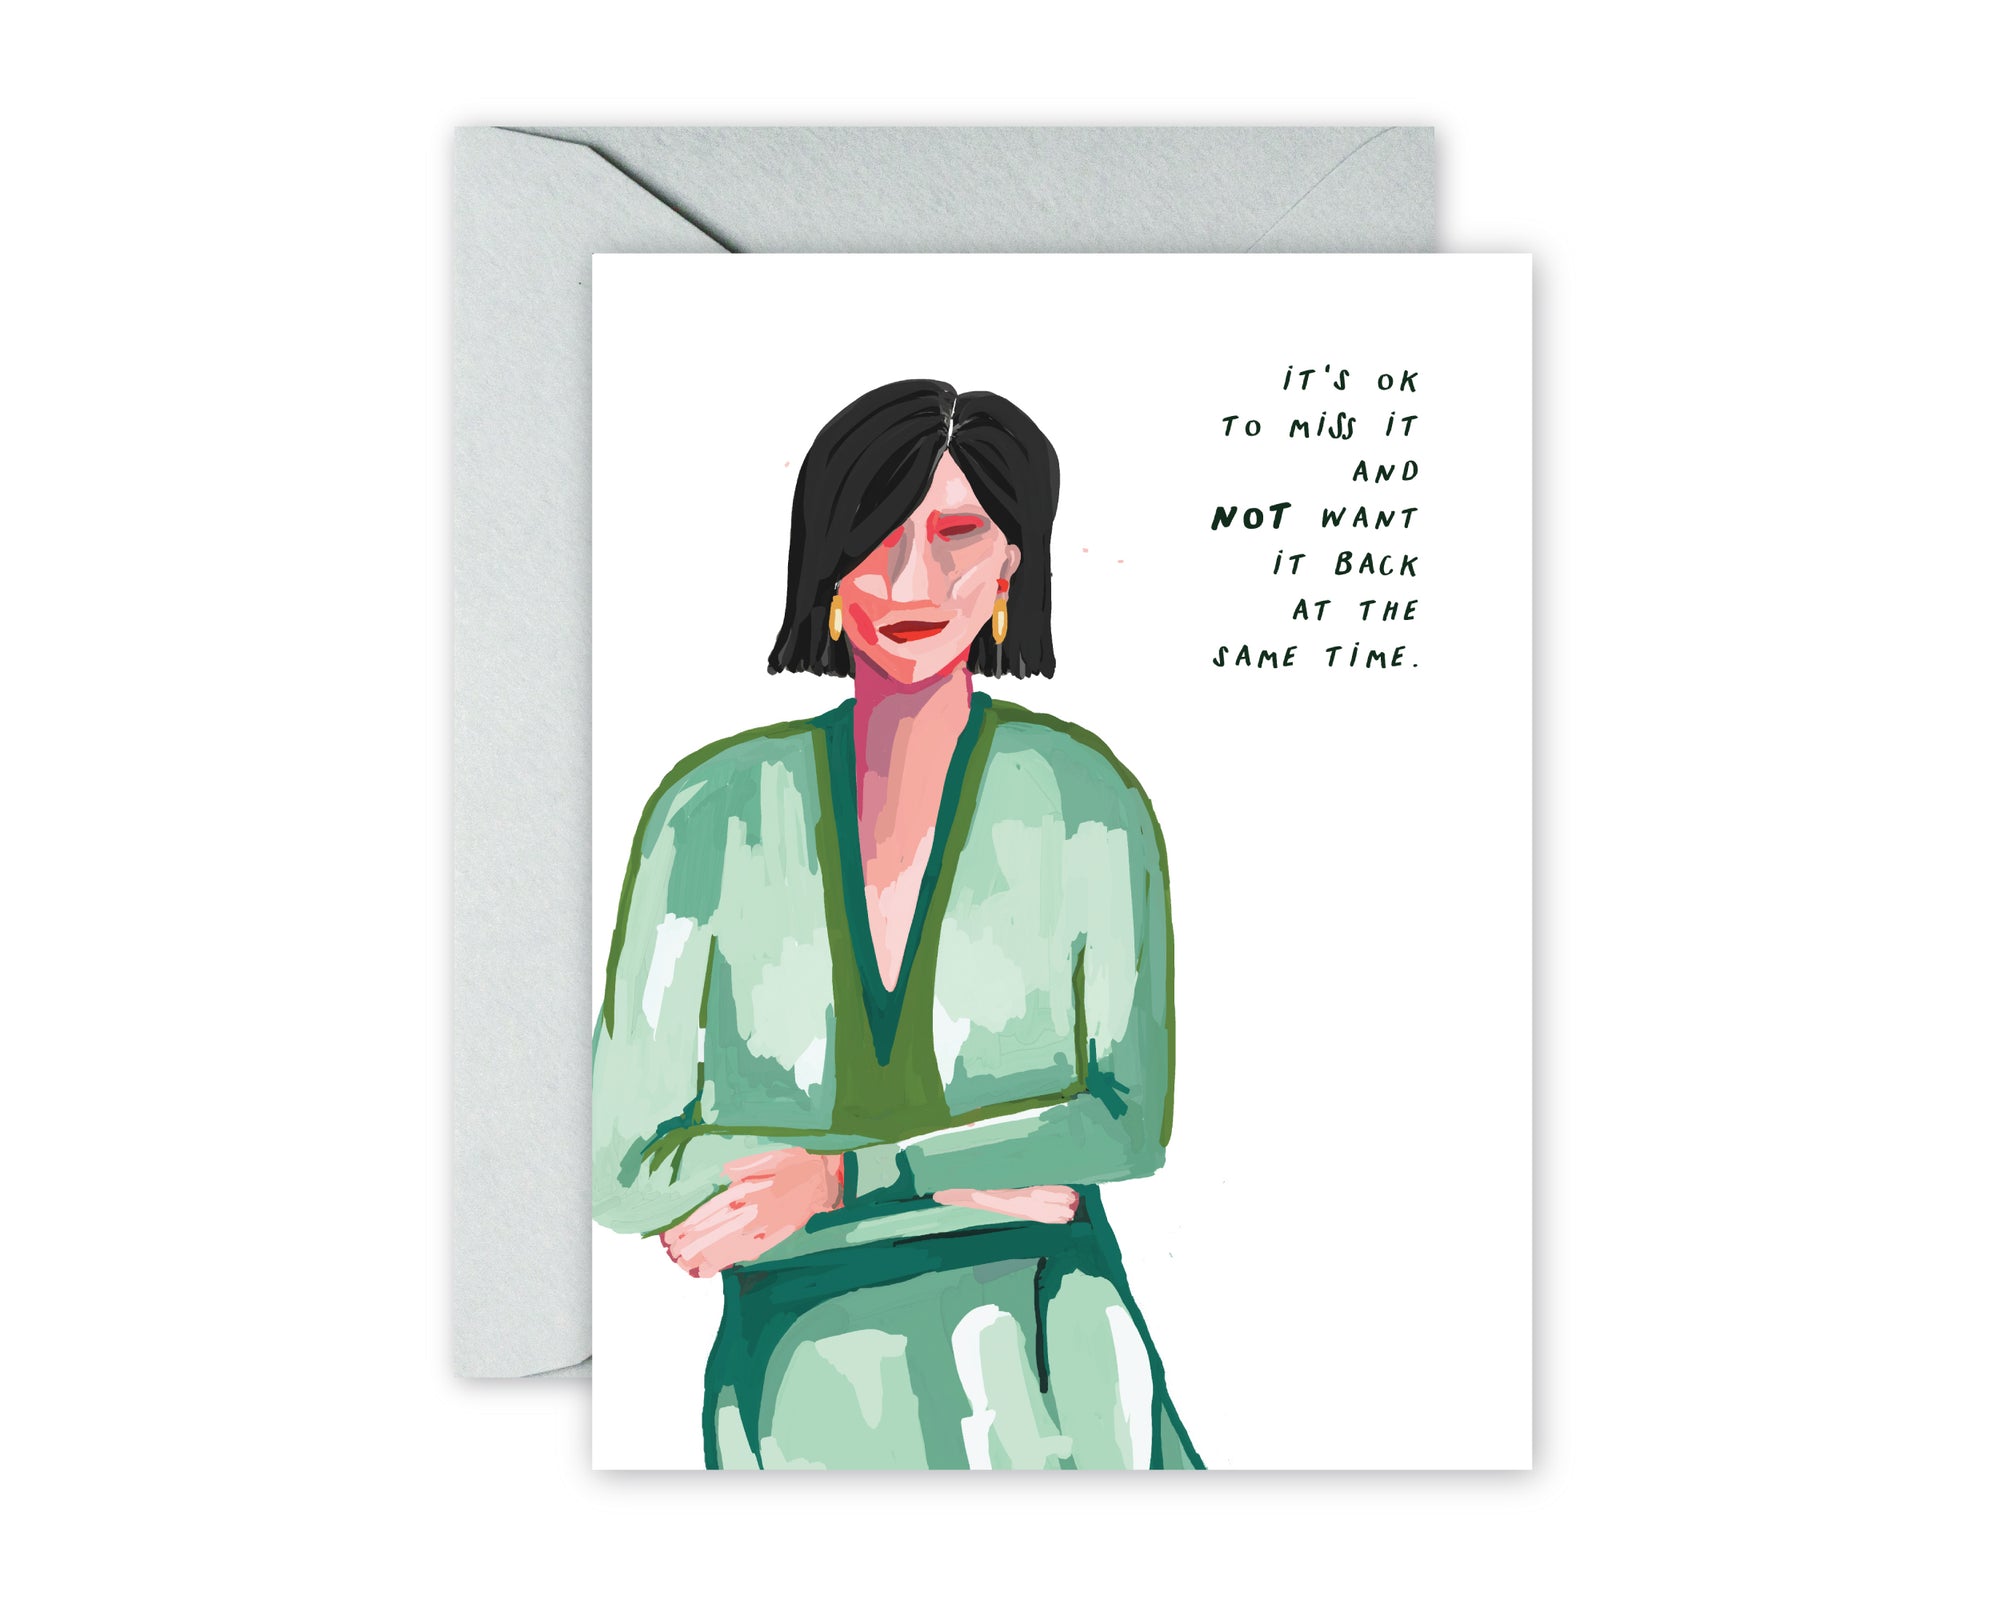 Greeting card with illustrated woman with dark bob, green print dress. And the saying IT'S OK TO MISS IT AND NOT WANT IT BACK AT THE SAME TIME. Grey envelope